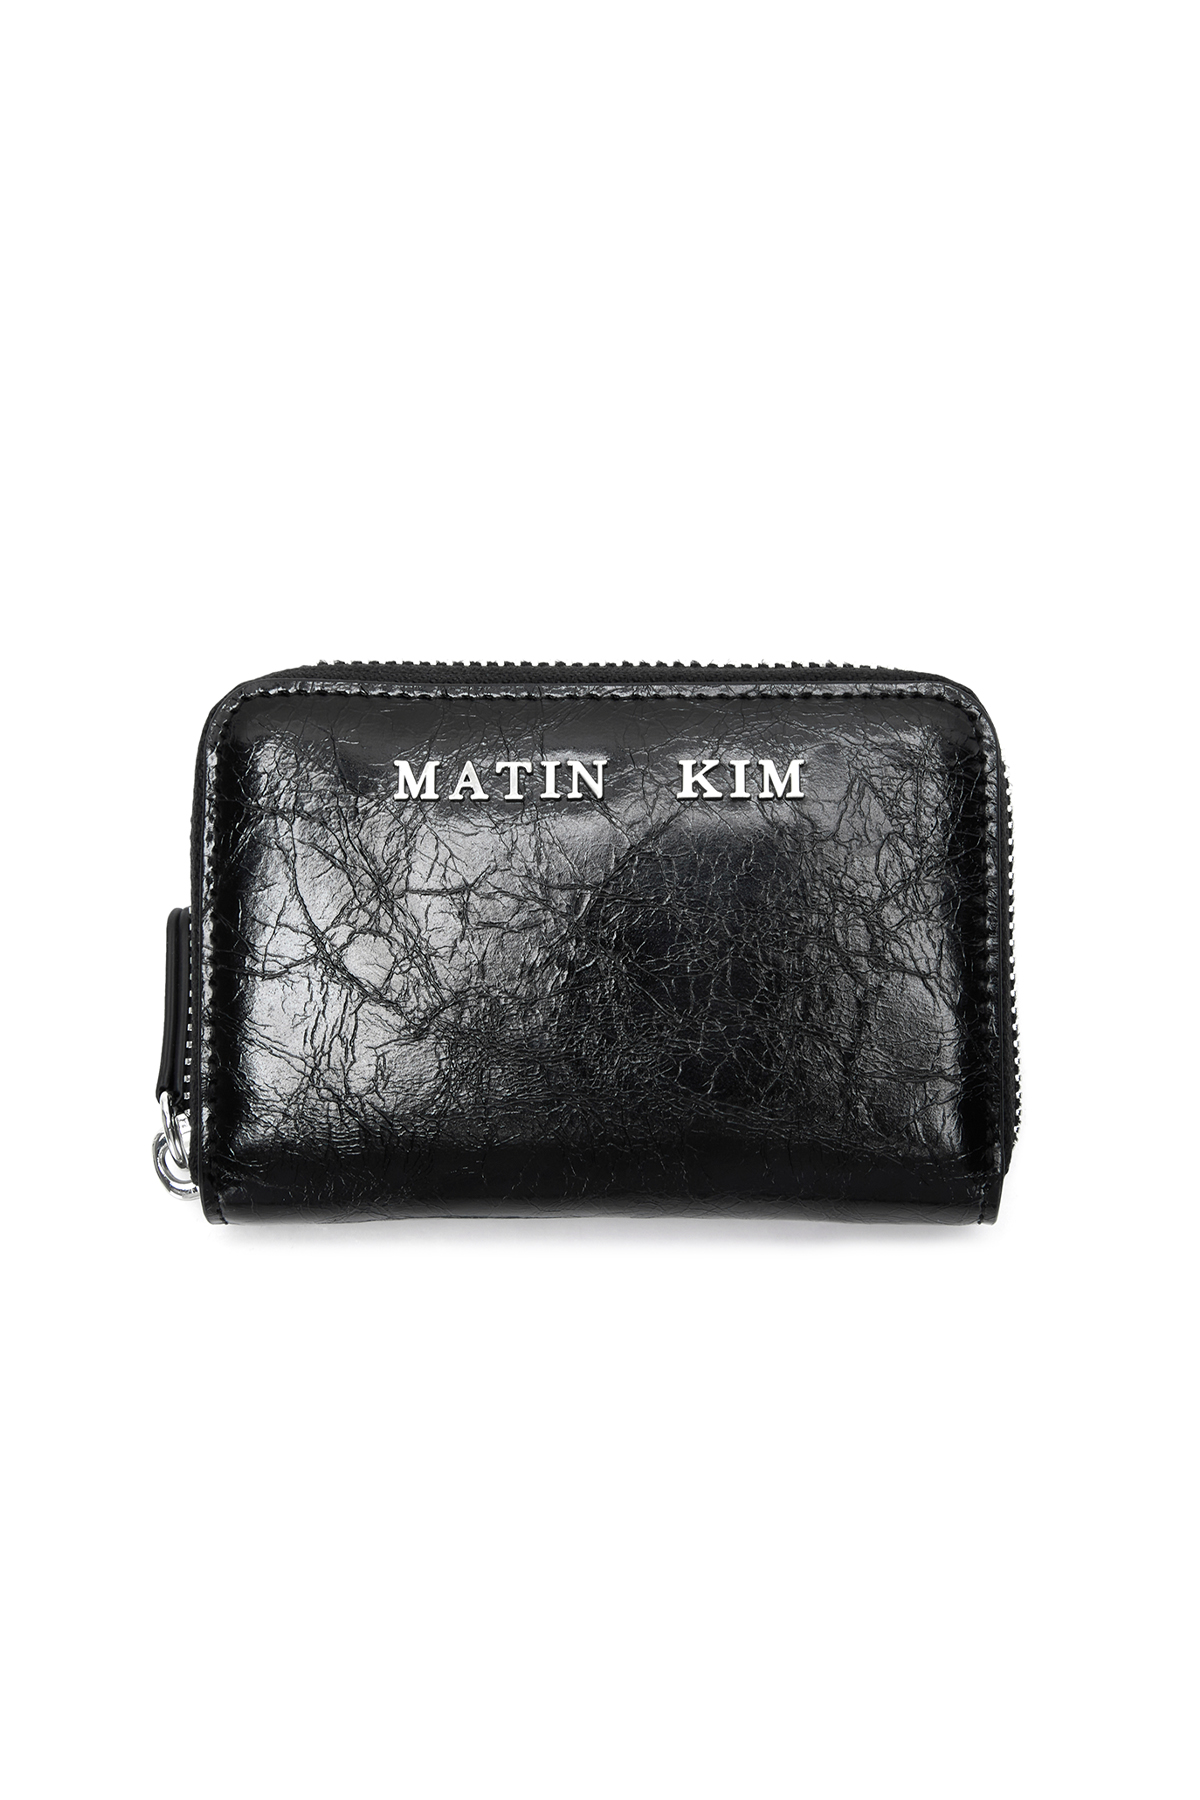 GLOSSY COMPACT WALLET IN BLACK